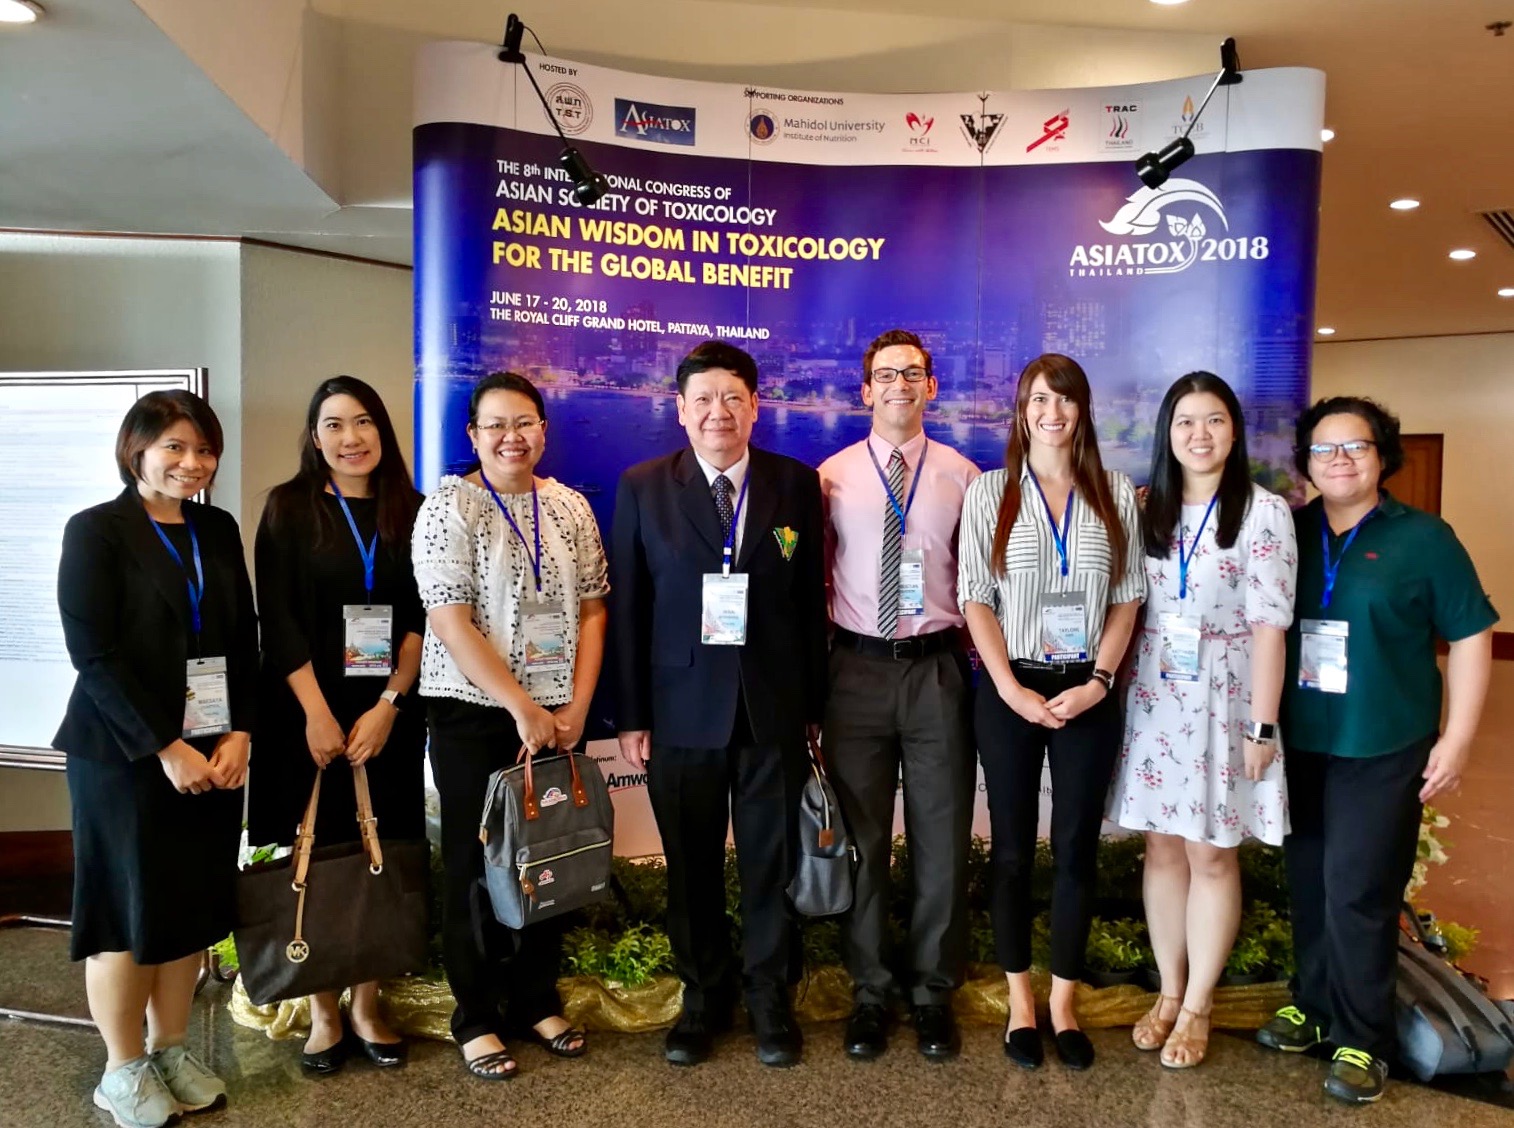 Group photo of Christian Davidson, Taylore King, and the Ramathibodi Poison Center toxicology team in front of the AsiaTox Conference sign